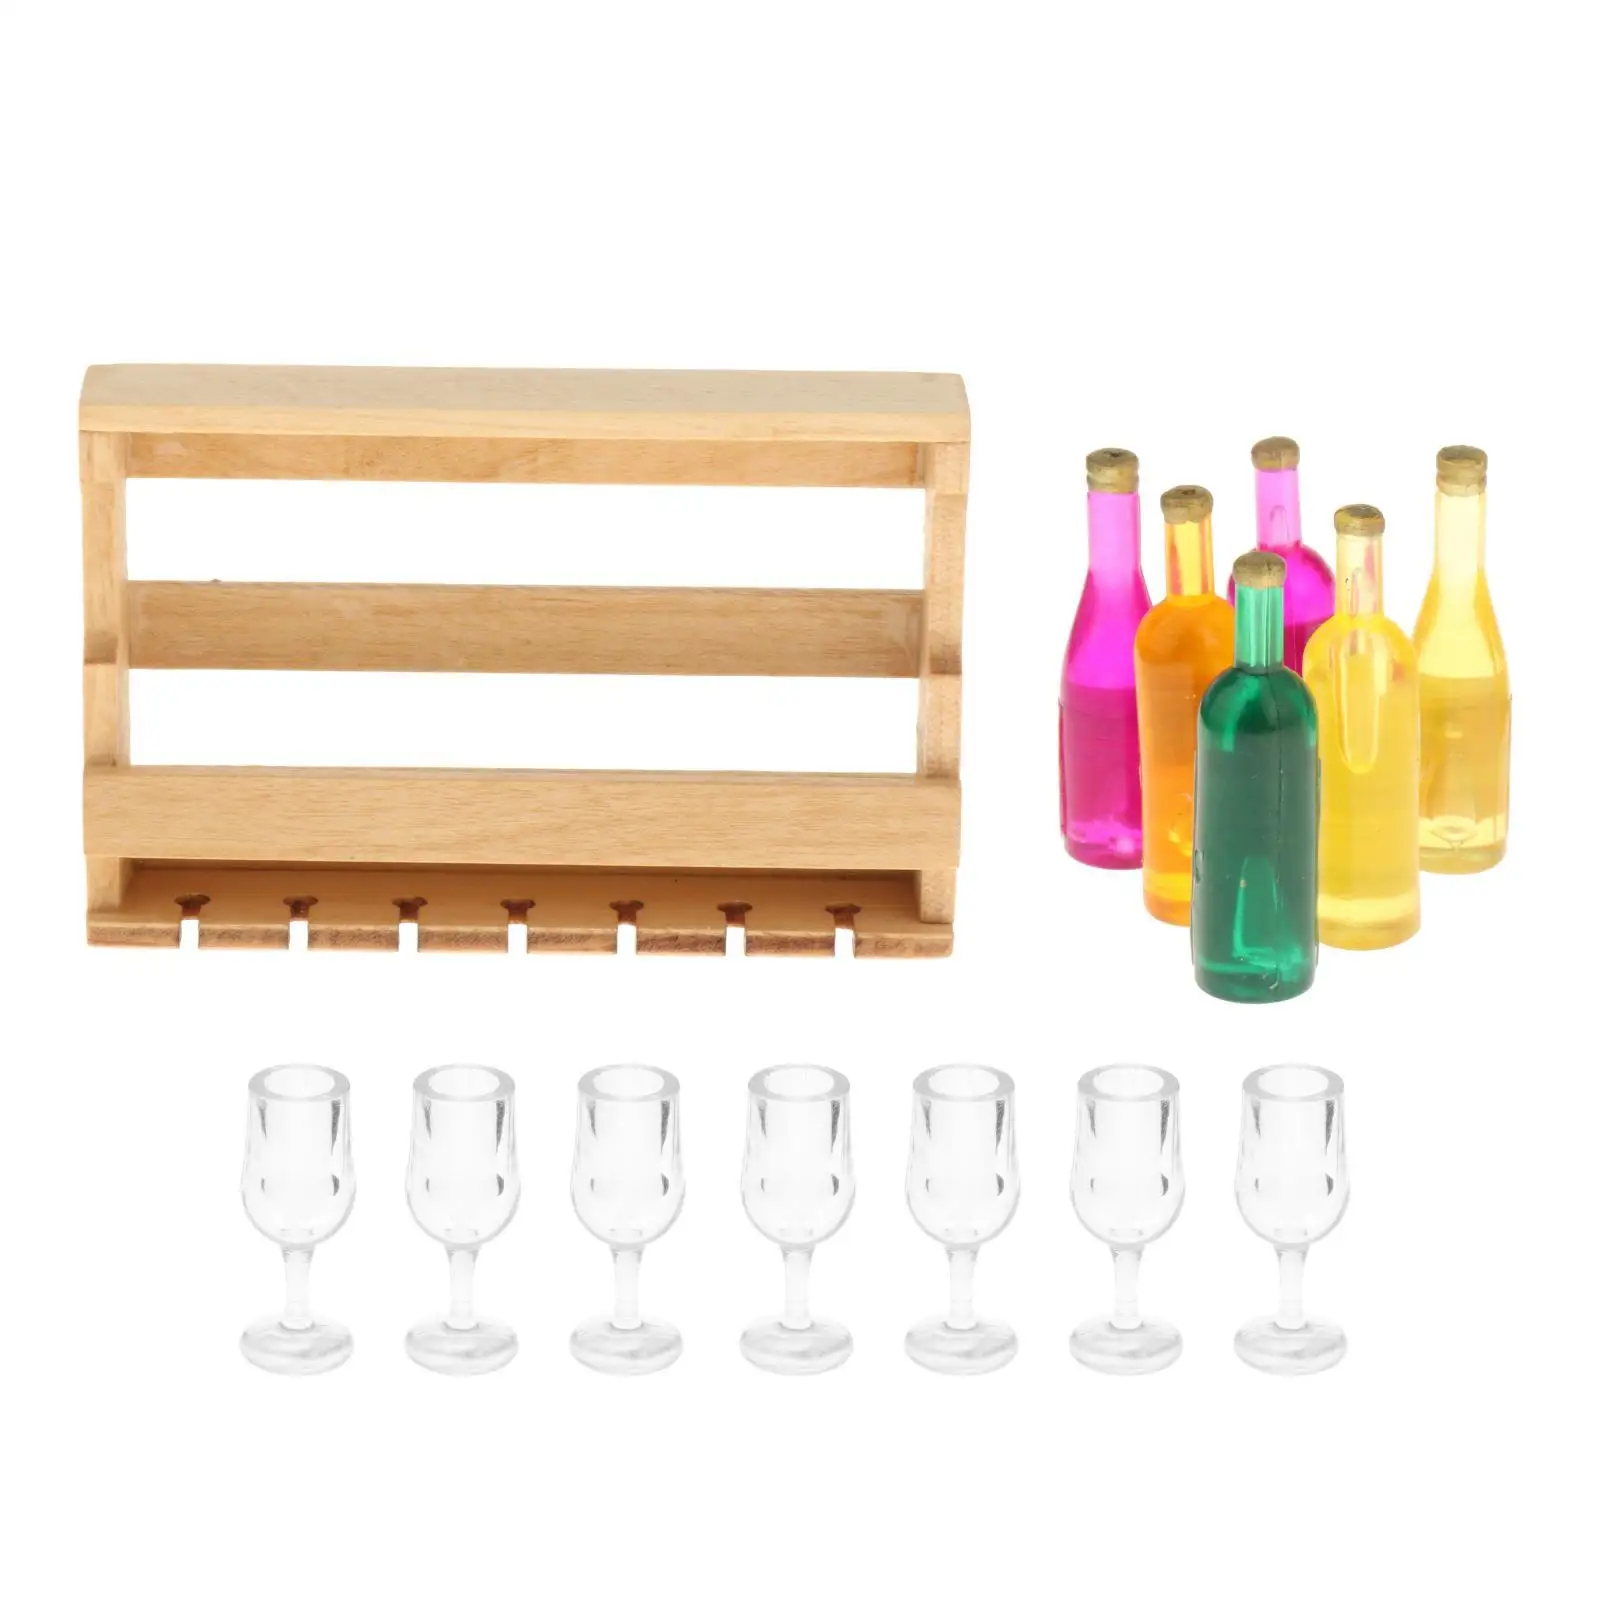 14 Pieces 1:12 Wine Rack with Bottles and Glass Cup Toys Life Scene Furniture Pretend Play for Kitchen Bar Living Room Decor